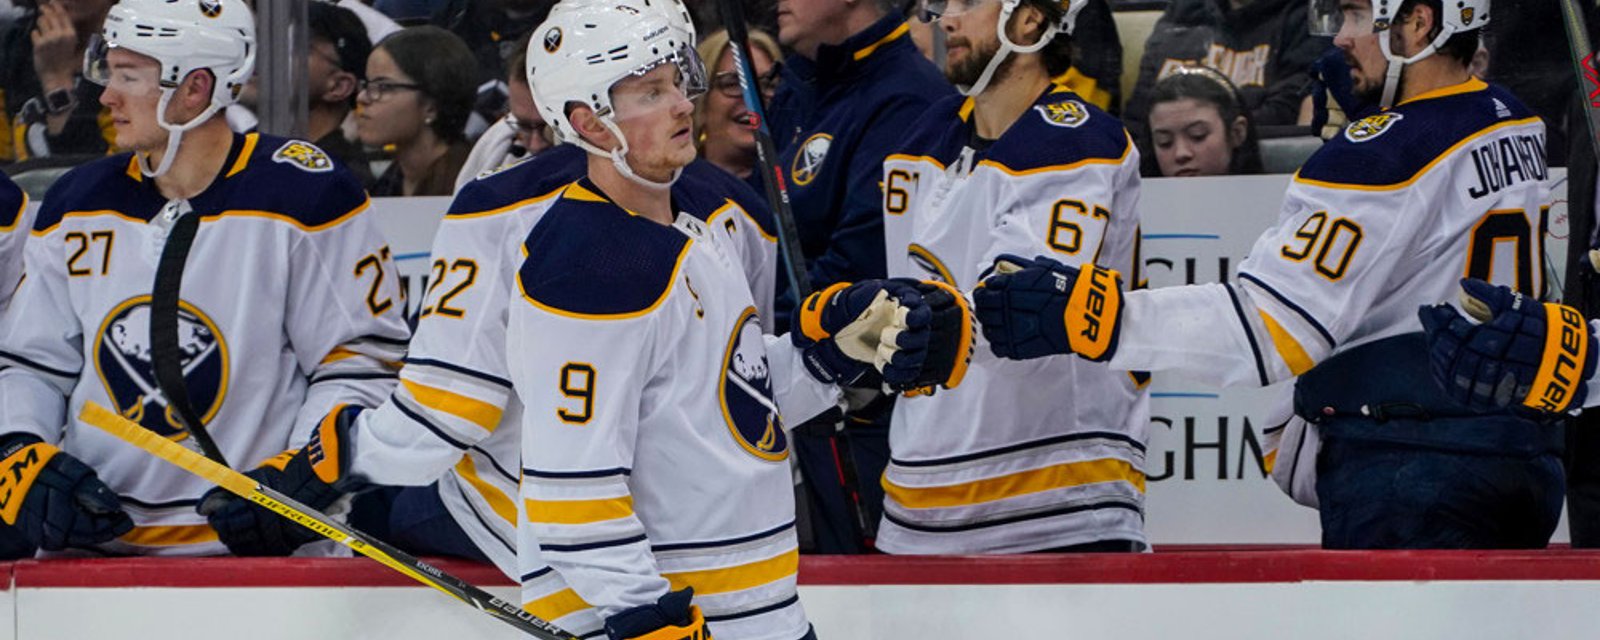 New developments in the Jack Eichel trade situation